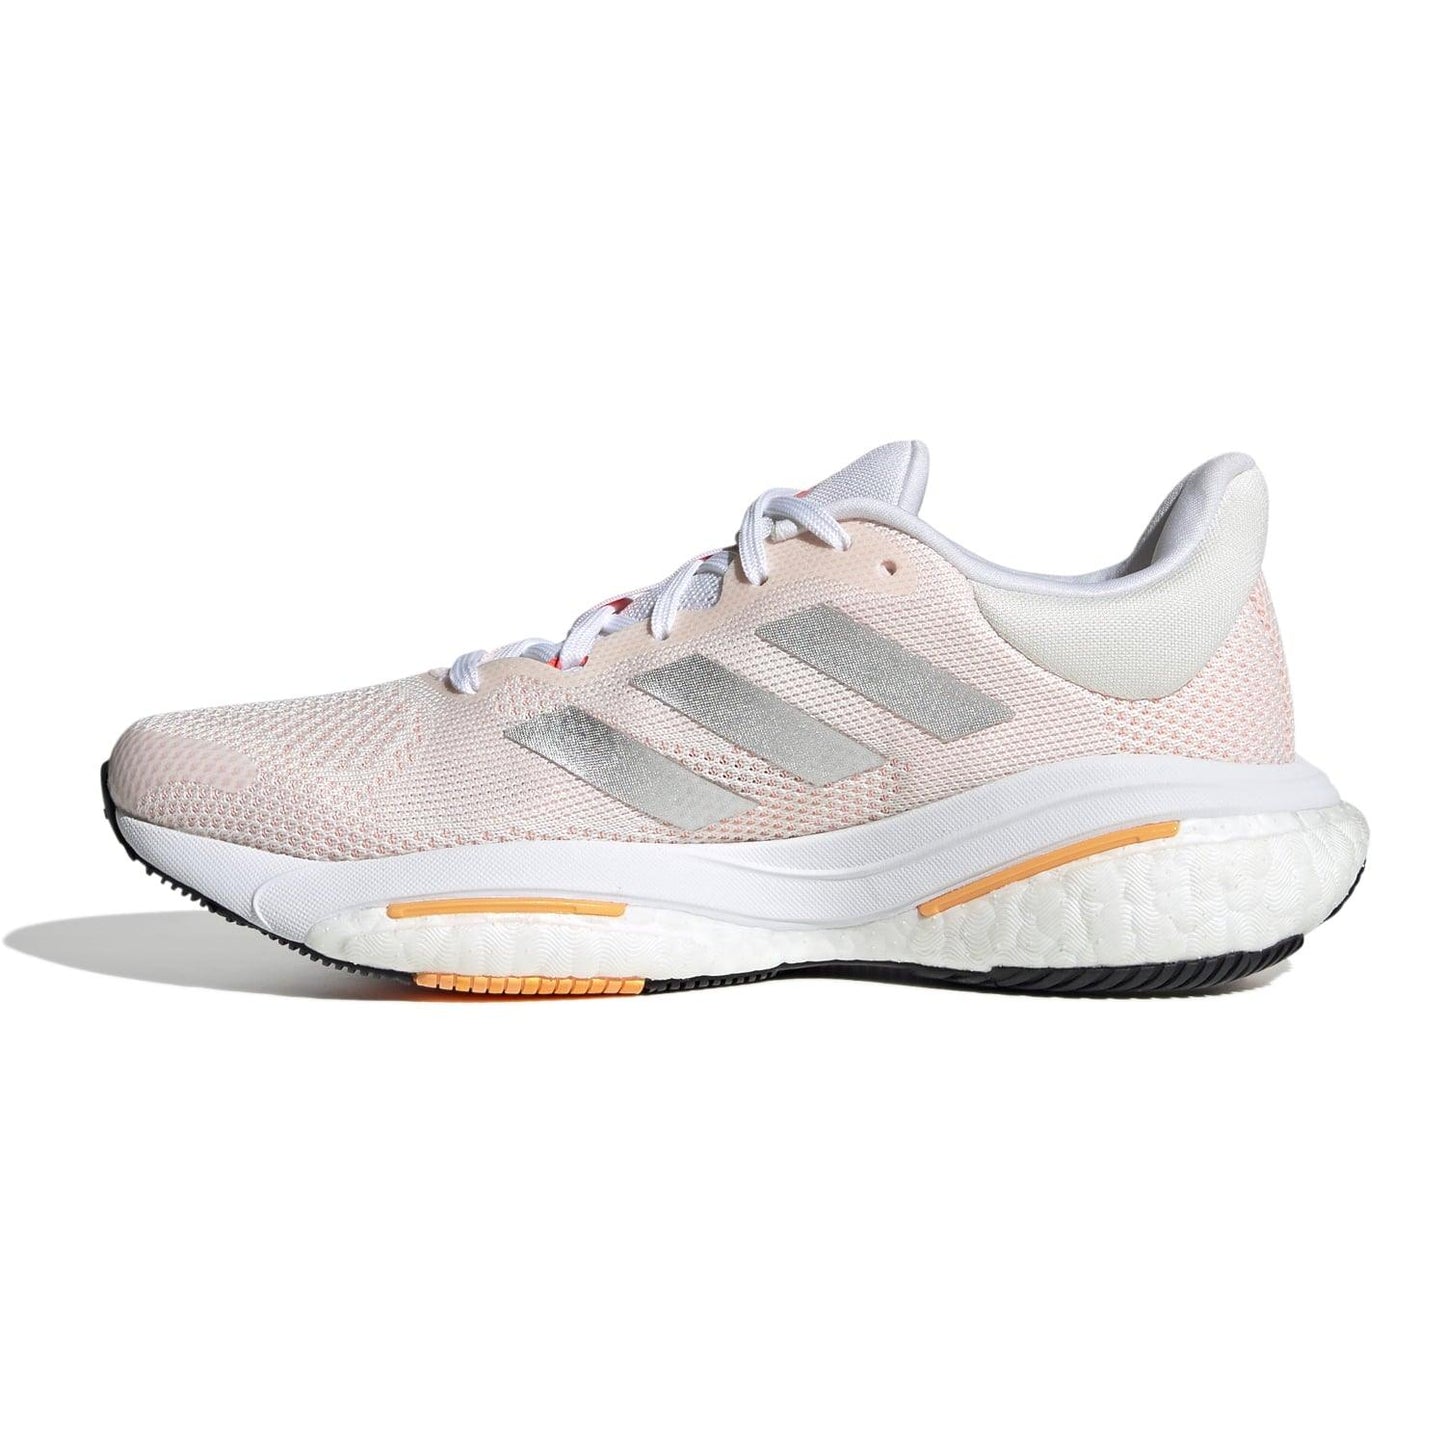 Adidas Solarglide 5 Women's - The Sweat Shop